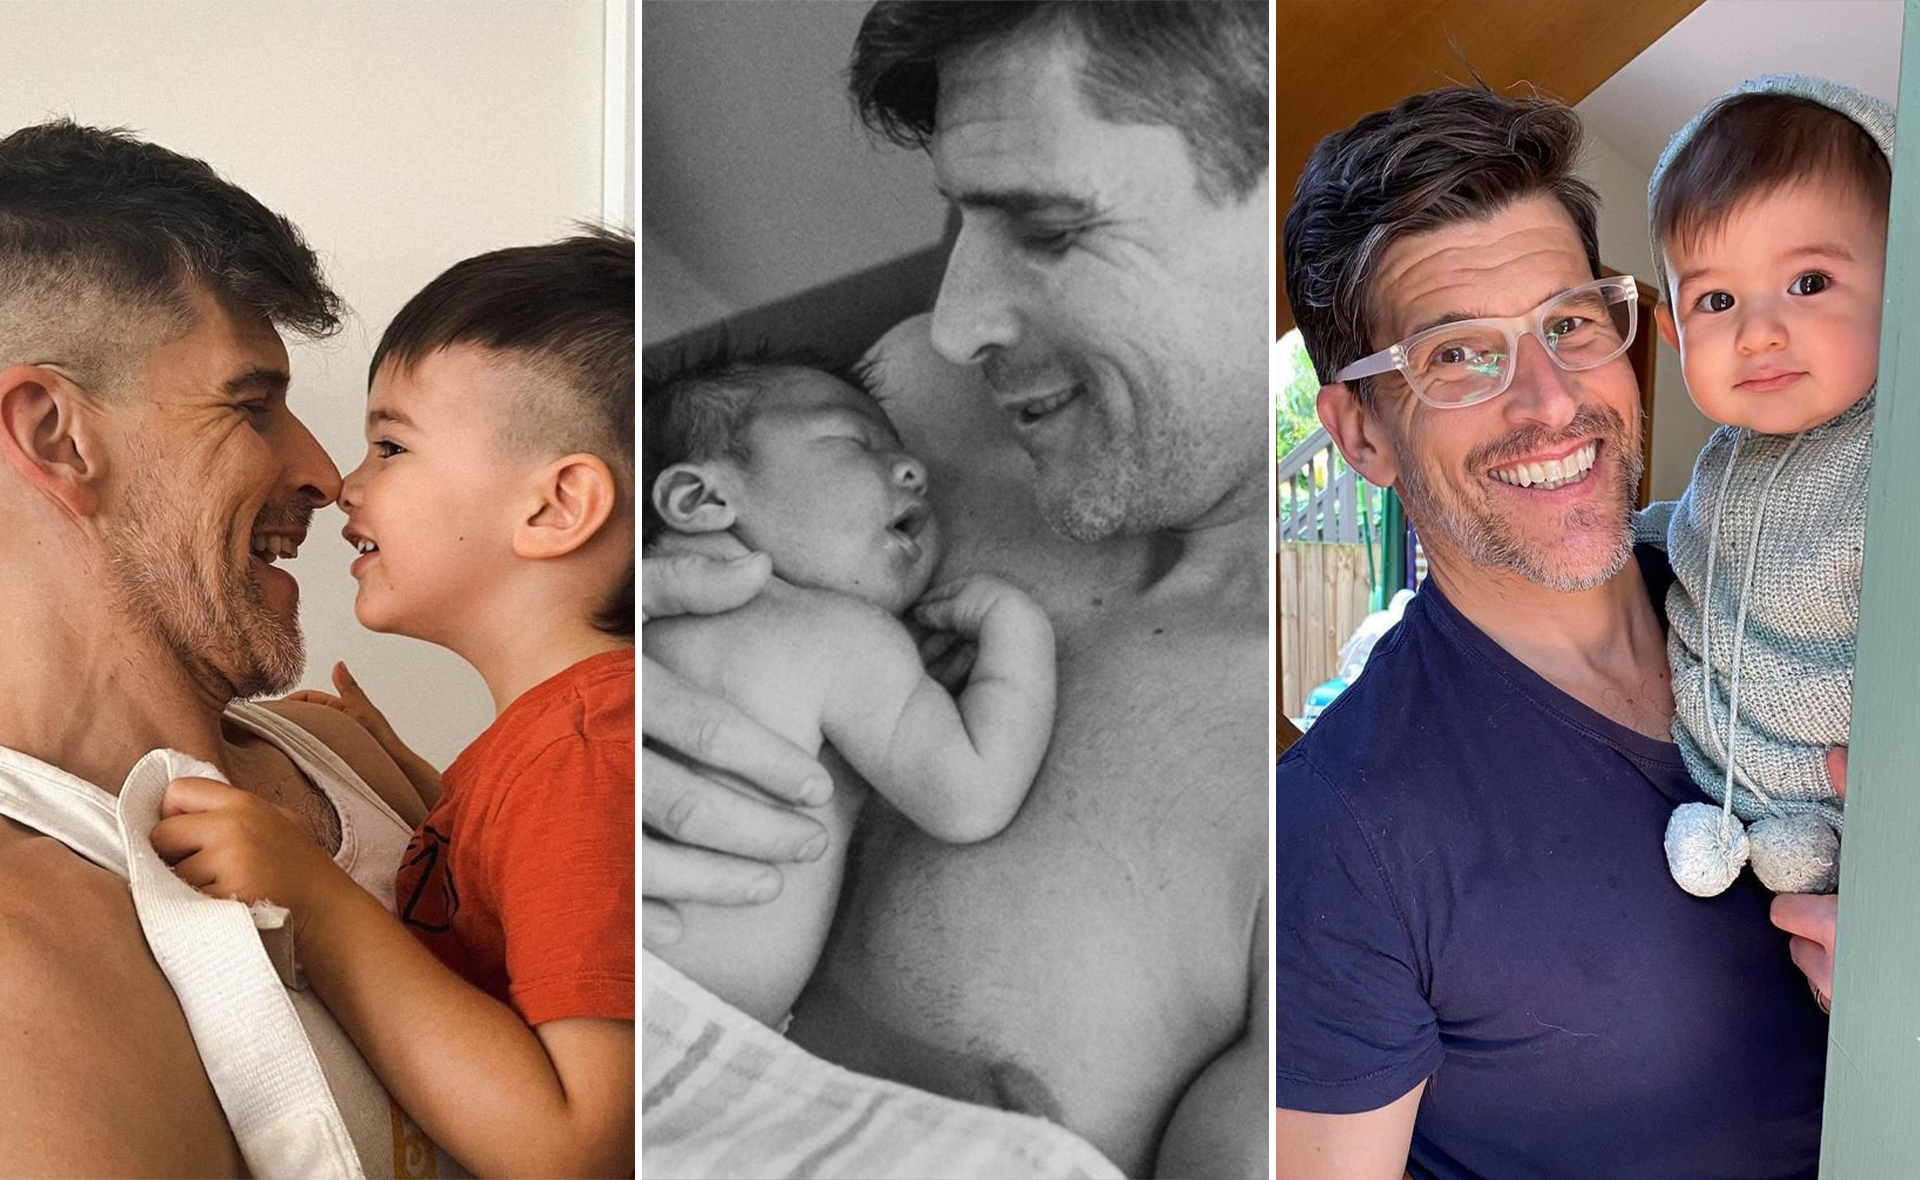 There’s no denying the bond between Osher Gunsberg and his mini-me son Wolfgang in these sweet family snaps